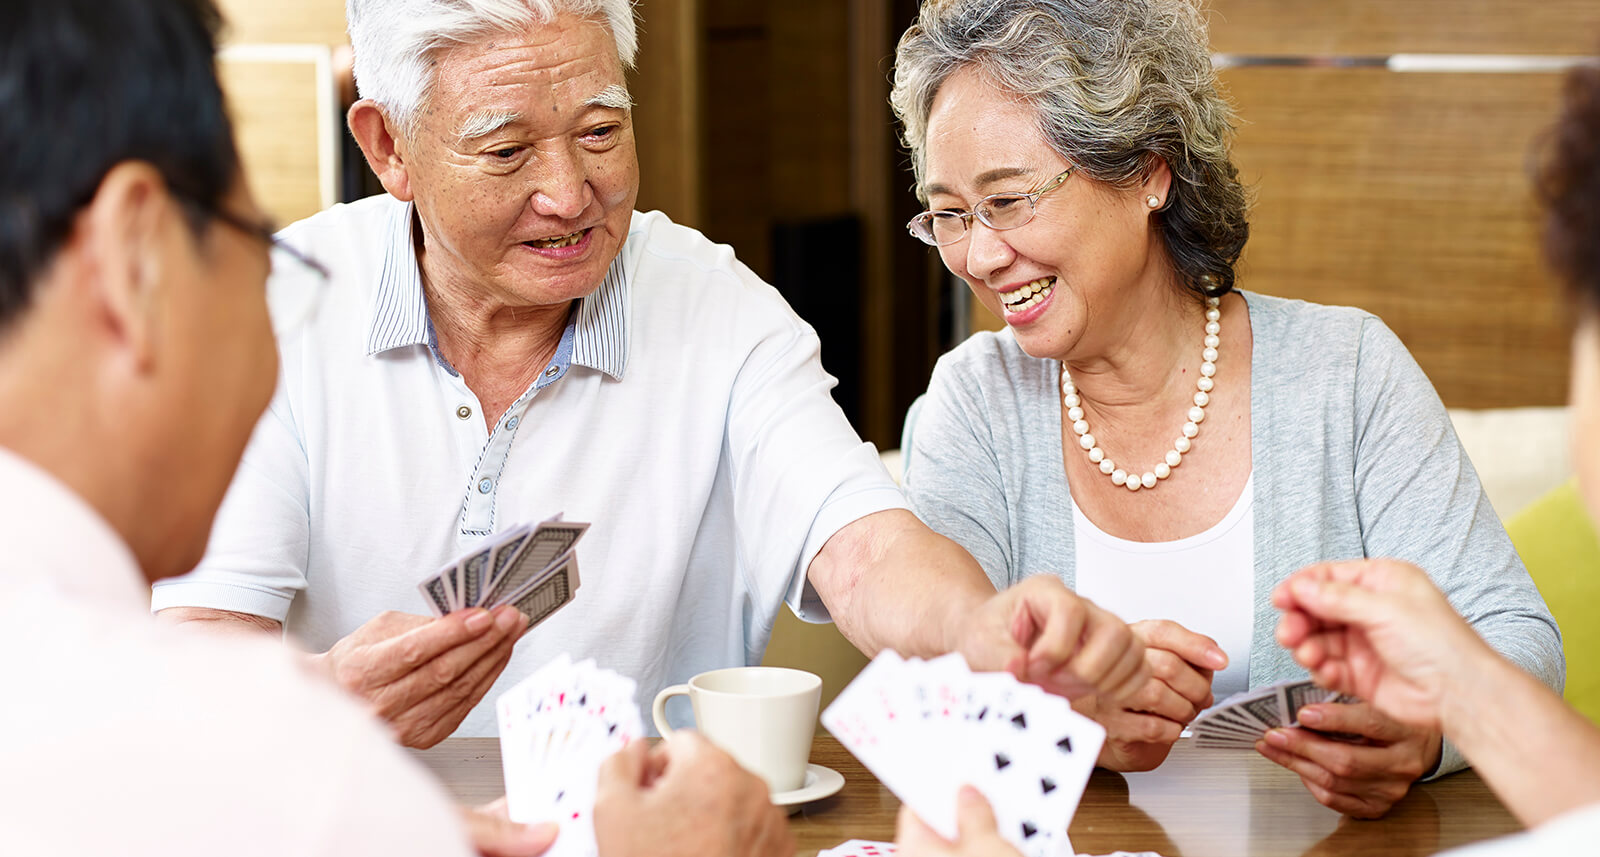 Group of mature people smiling while playing cards